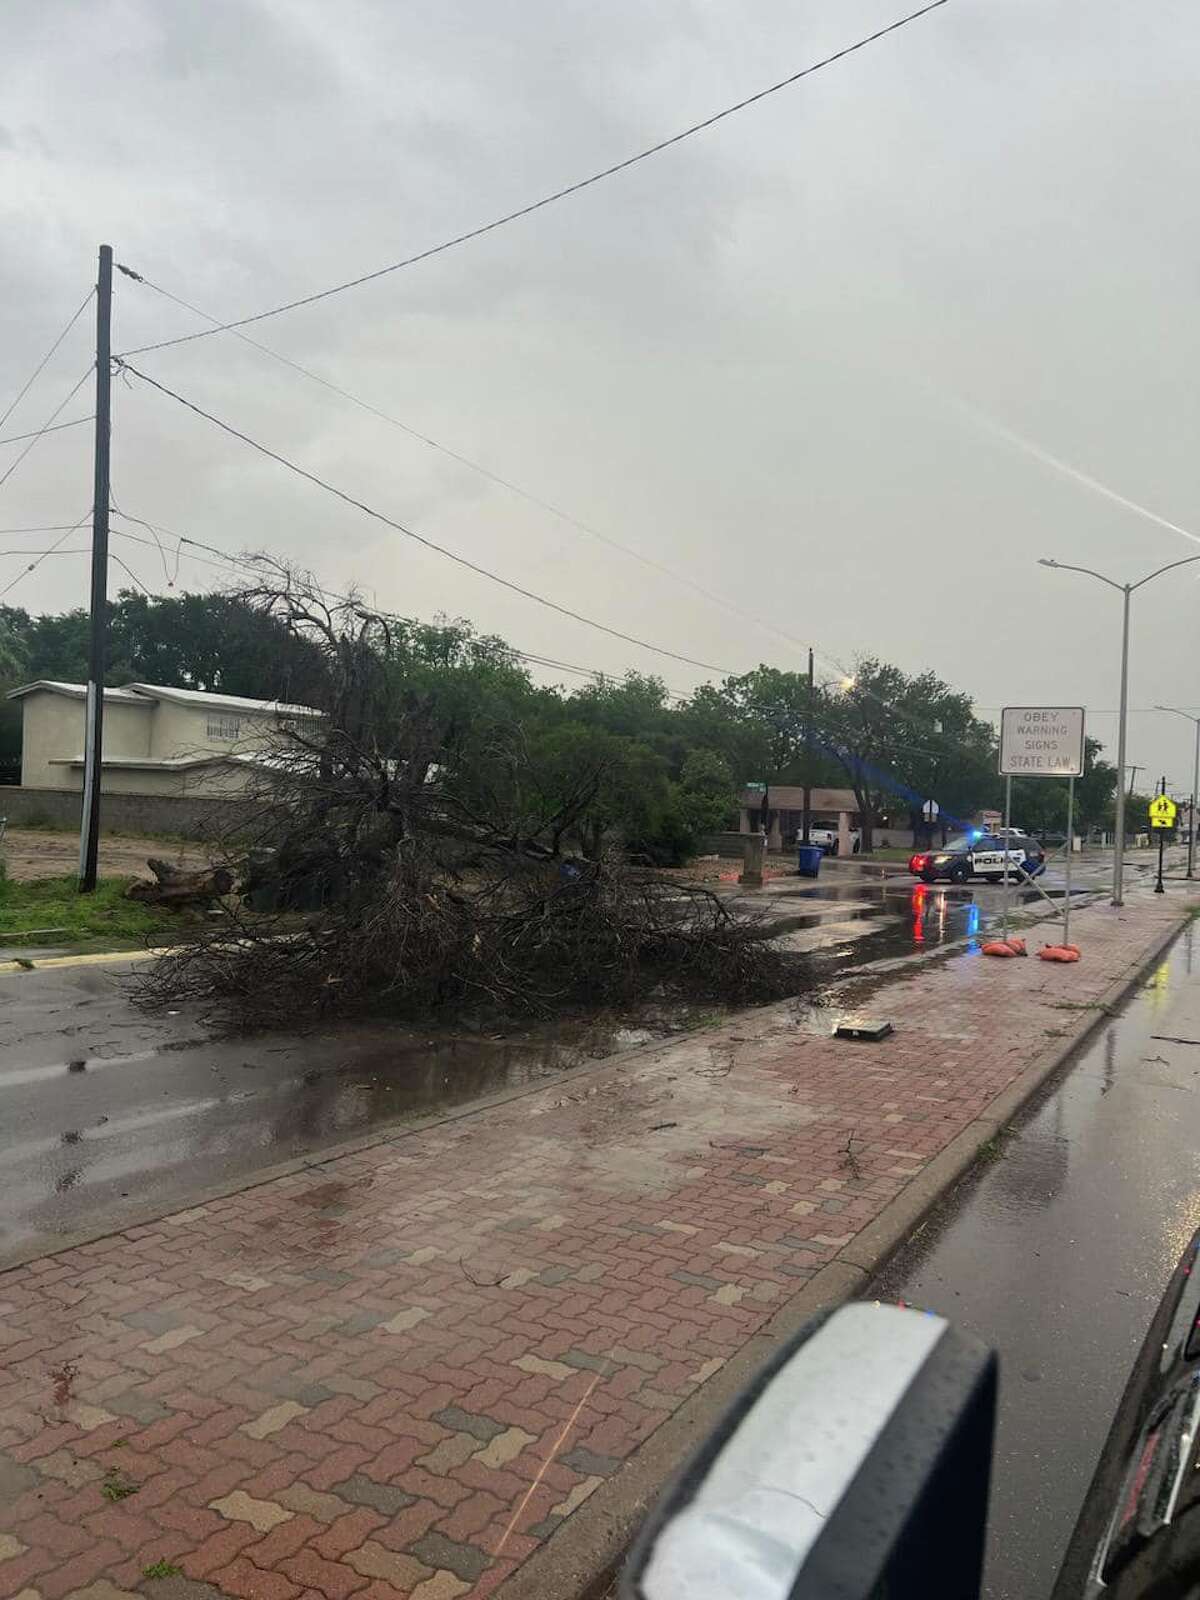 Pictured is a tree that fell during storms that hit Laredo on Sunday morning.